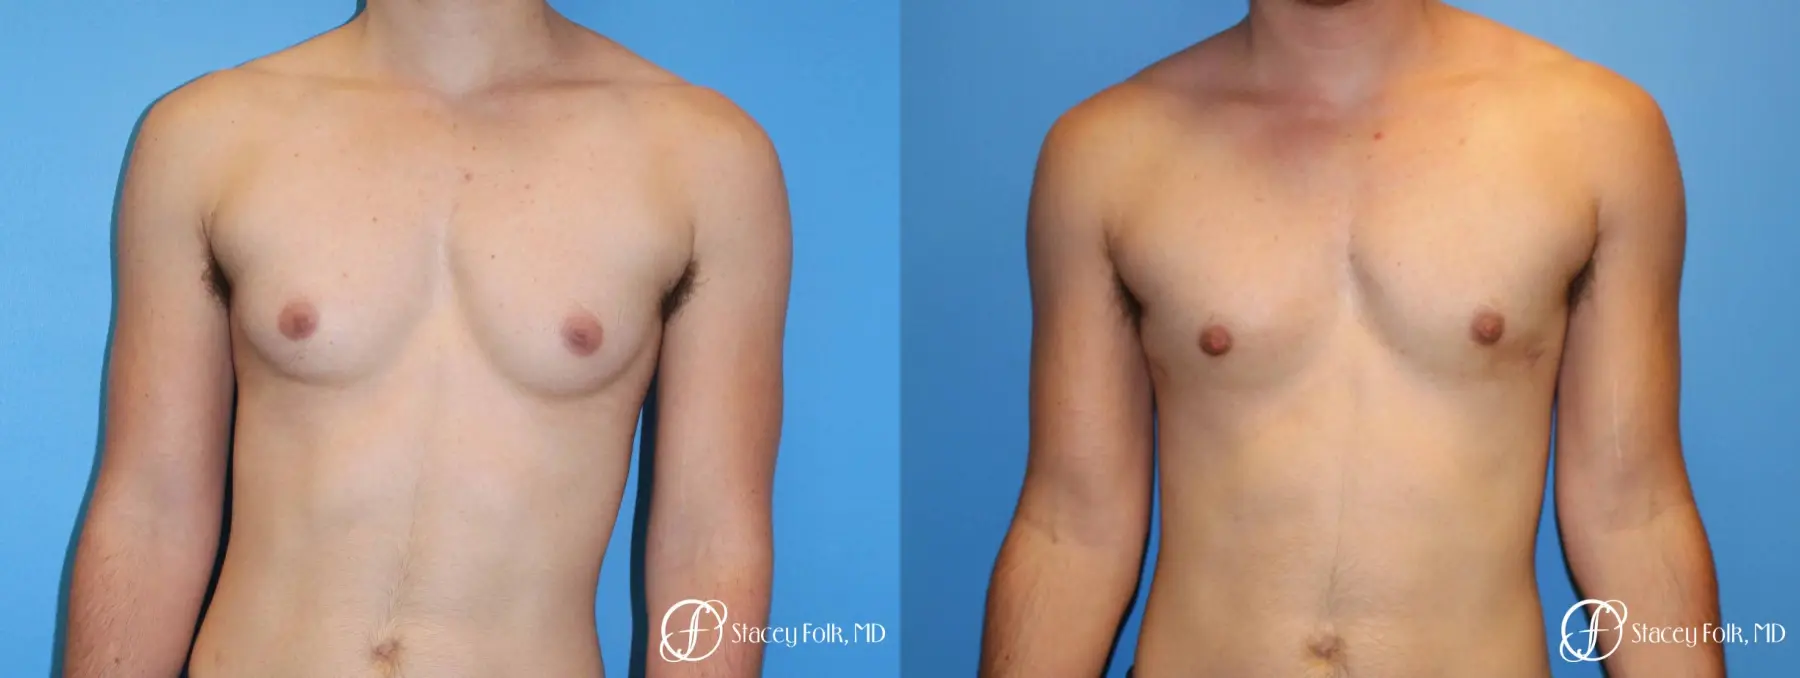 Denver FTM female to male top surgery using gynecomastia technique 5128 - Before and After 1